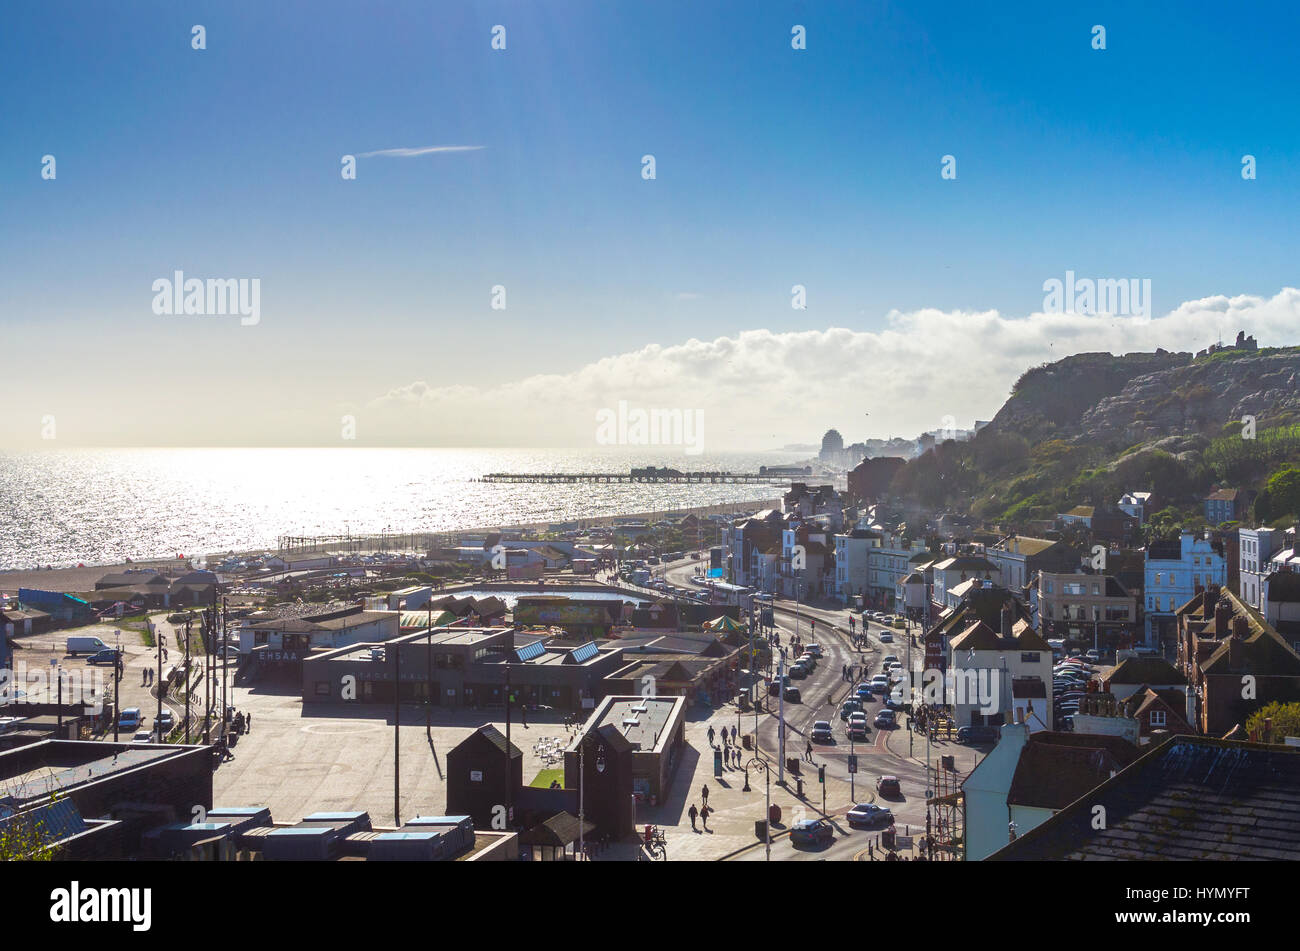 Seaside town of Hastings on a busy weekend in early spring Stock Photo